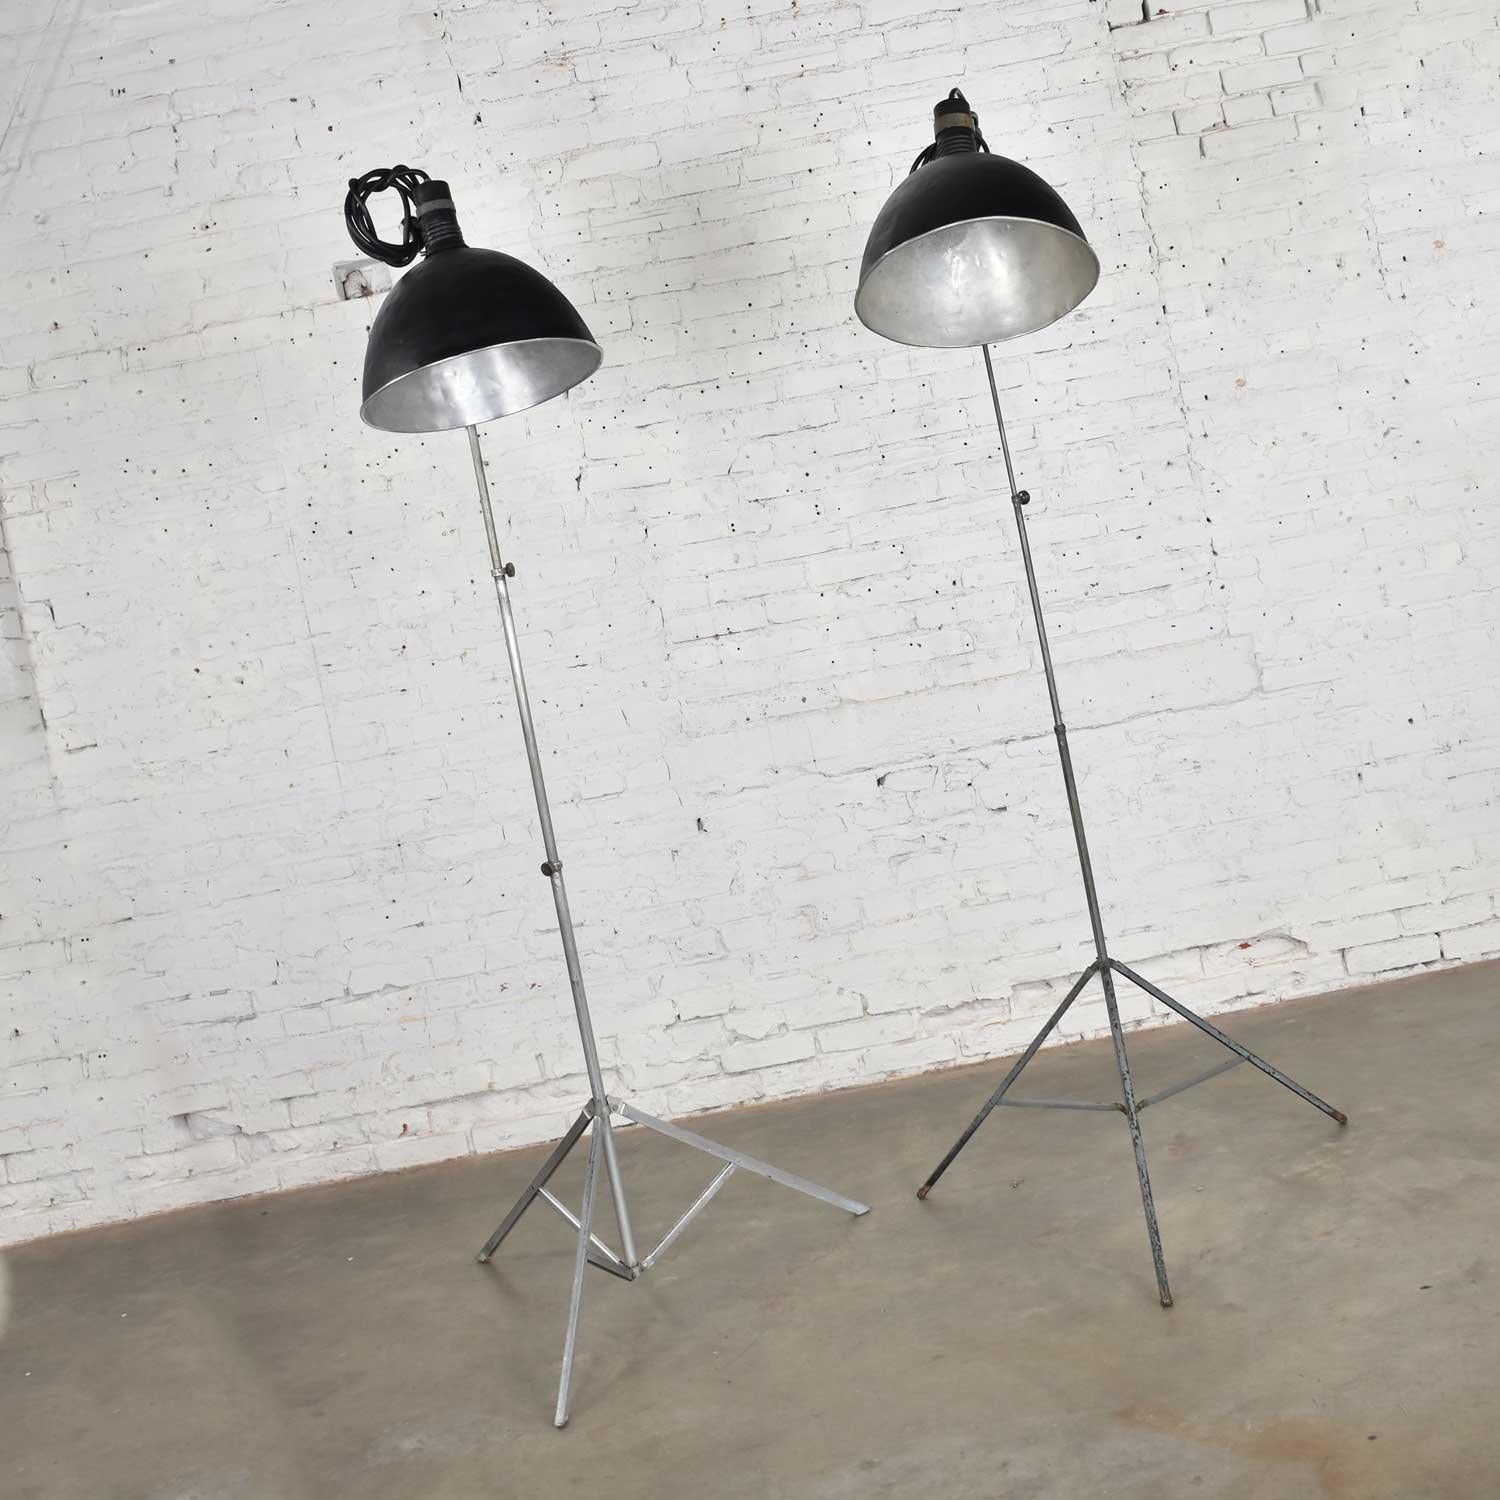 Fabulous vintage Industrial pair of aluminum and steel structured photographers floor lights with tripod bases. They are in wonderful vintage condition Beat up with lots of dents and patina. Fresh coat of texture paint on shades. Please see photos.